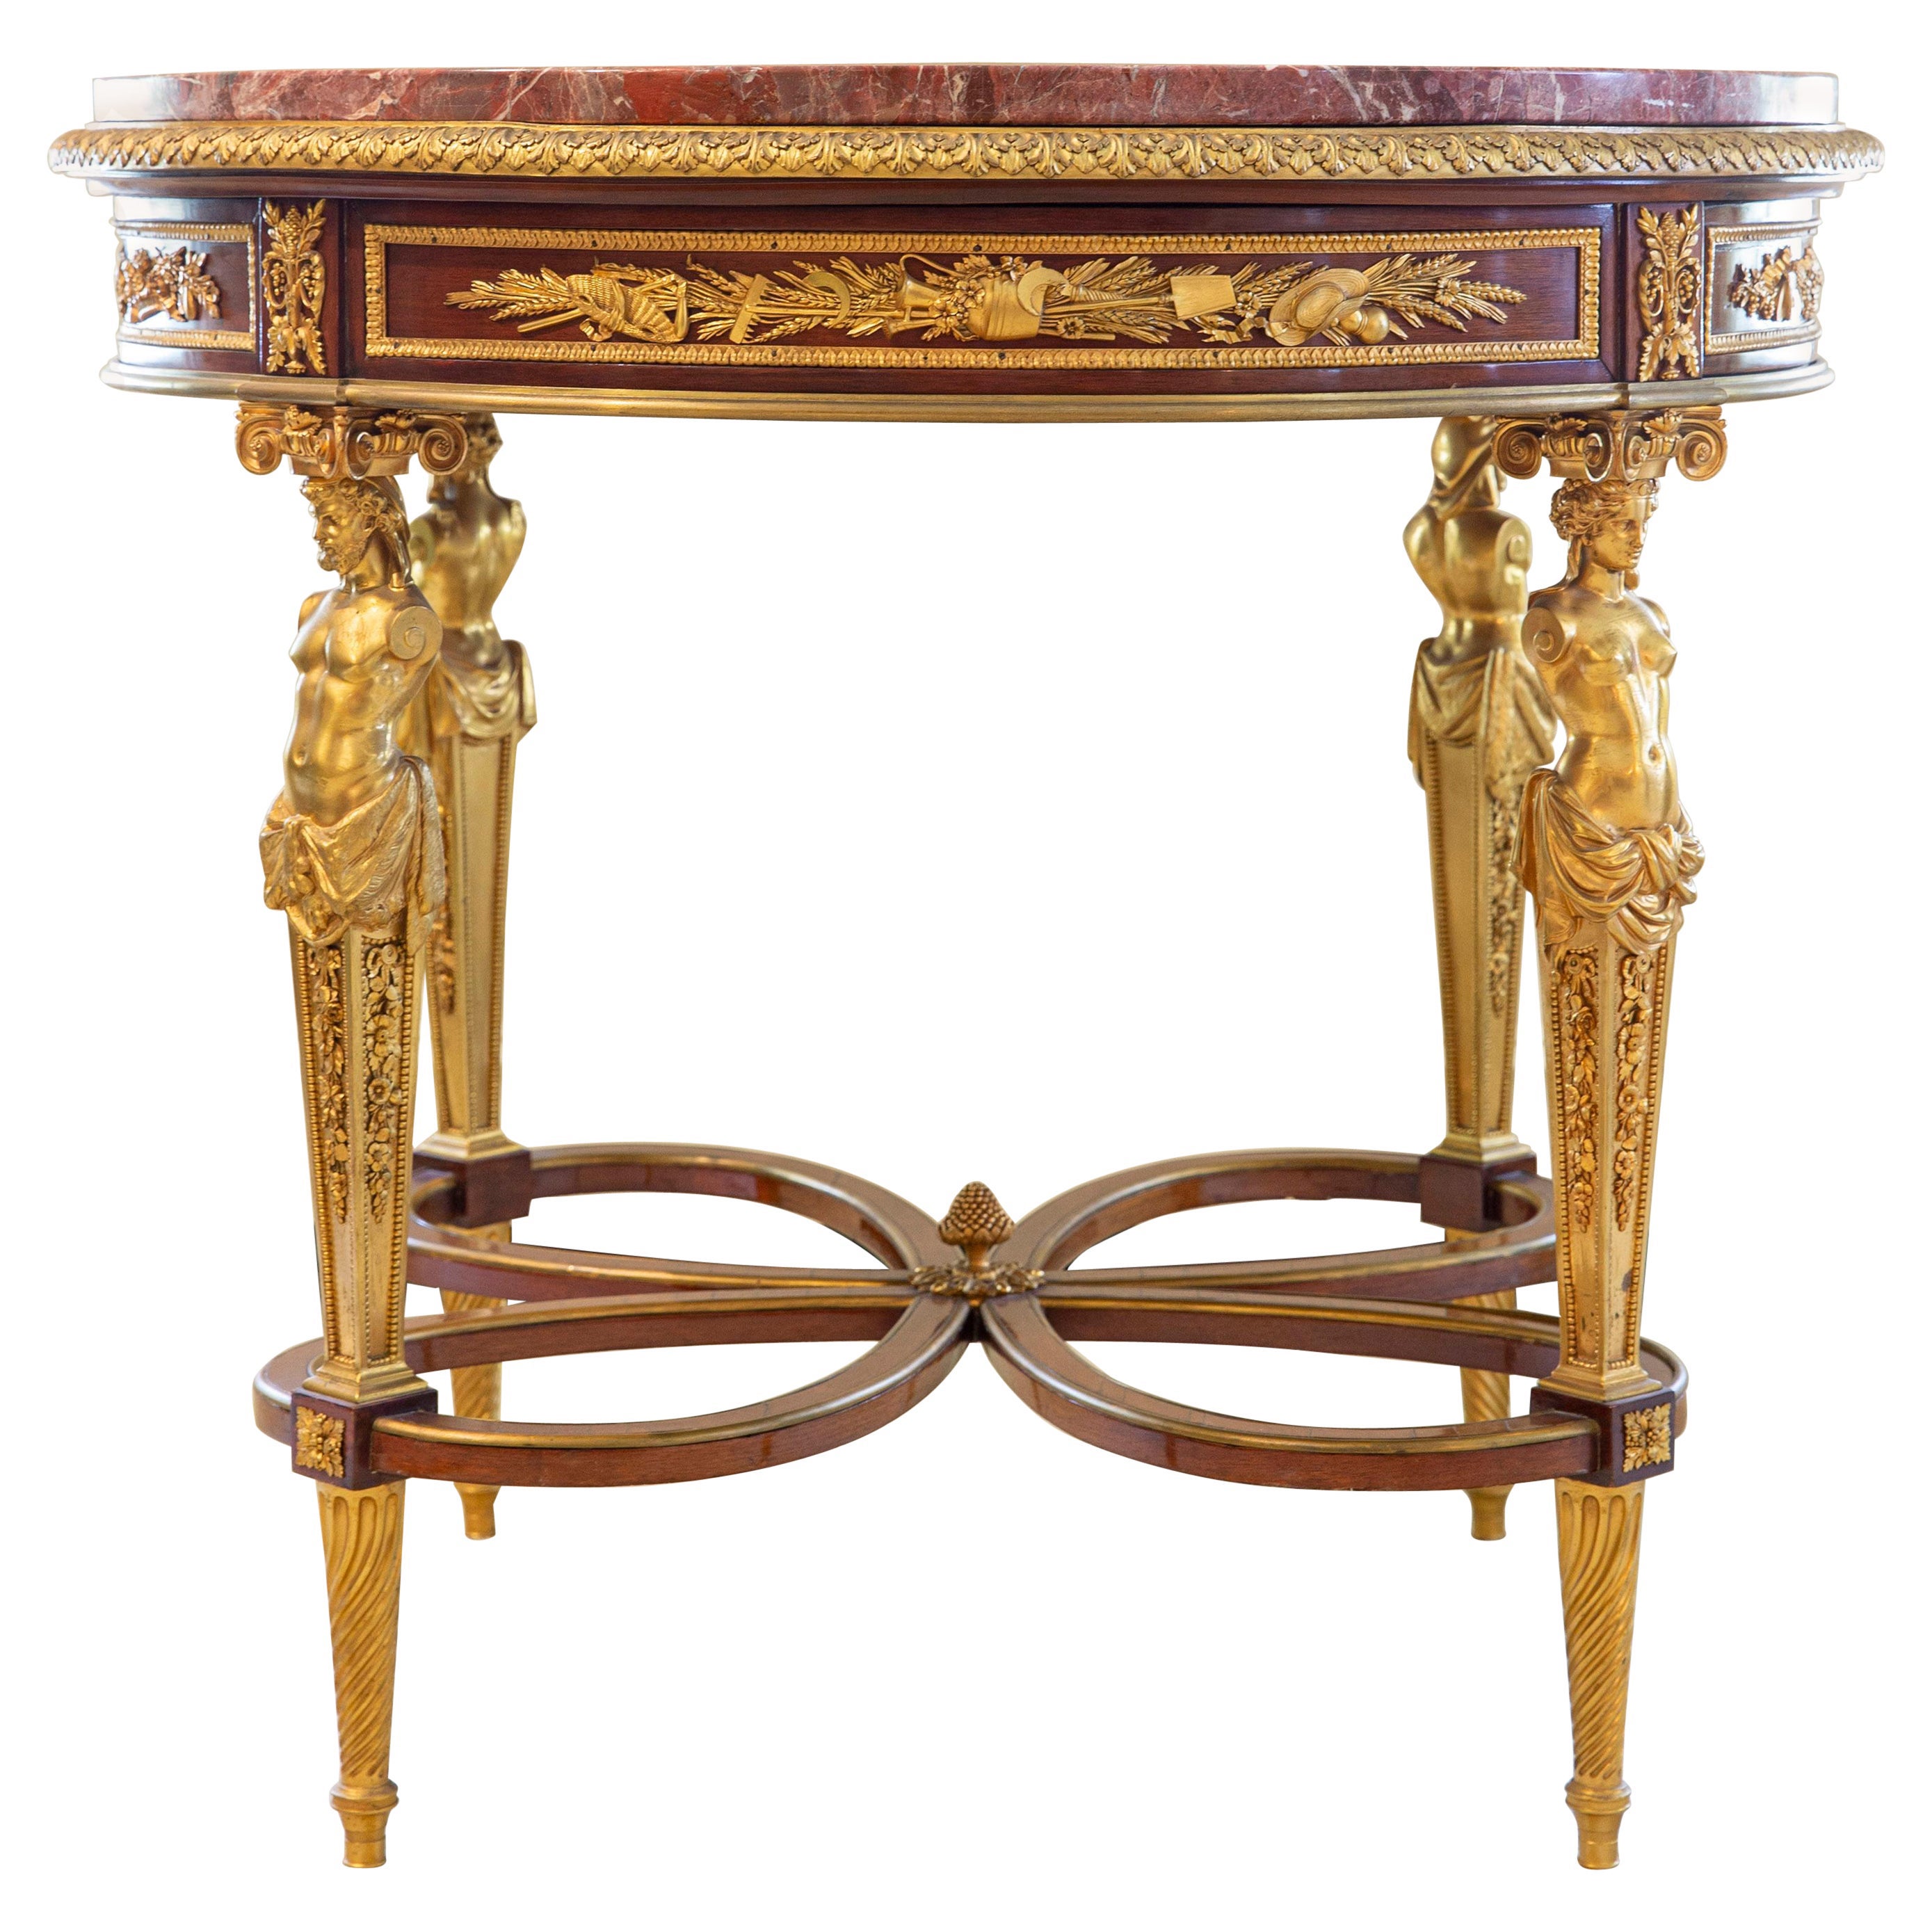 A Very Fine Late 19th Century Gilt Bronze Mounted Center Table by Henry Dasson For Sale